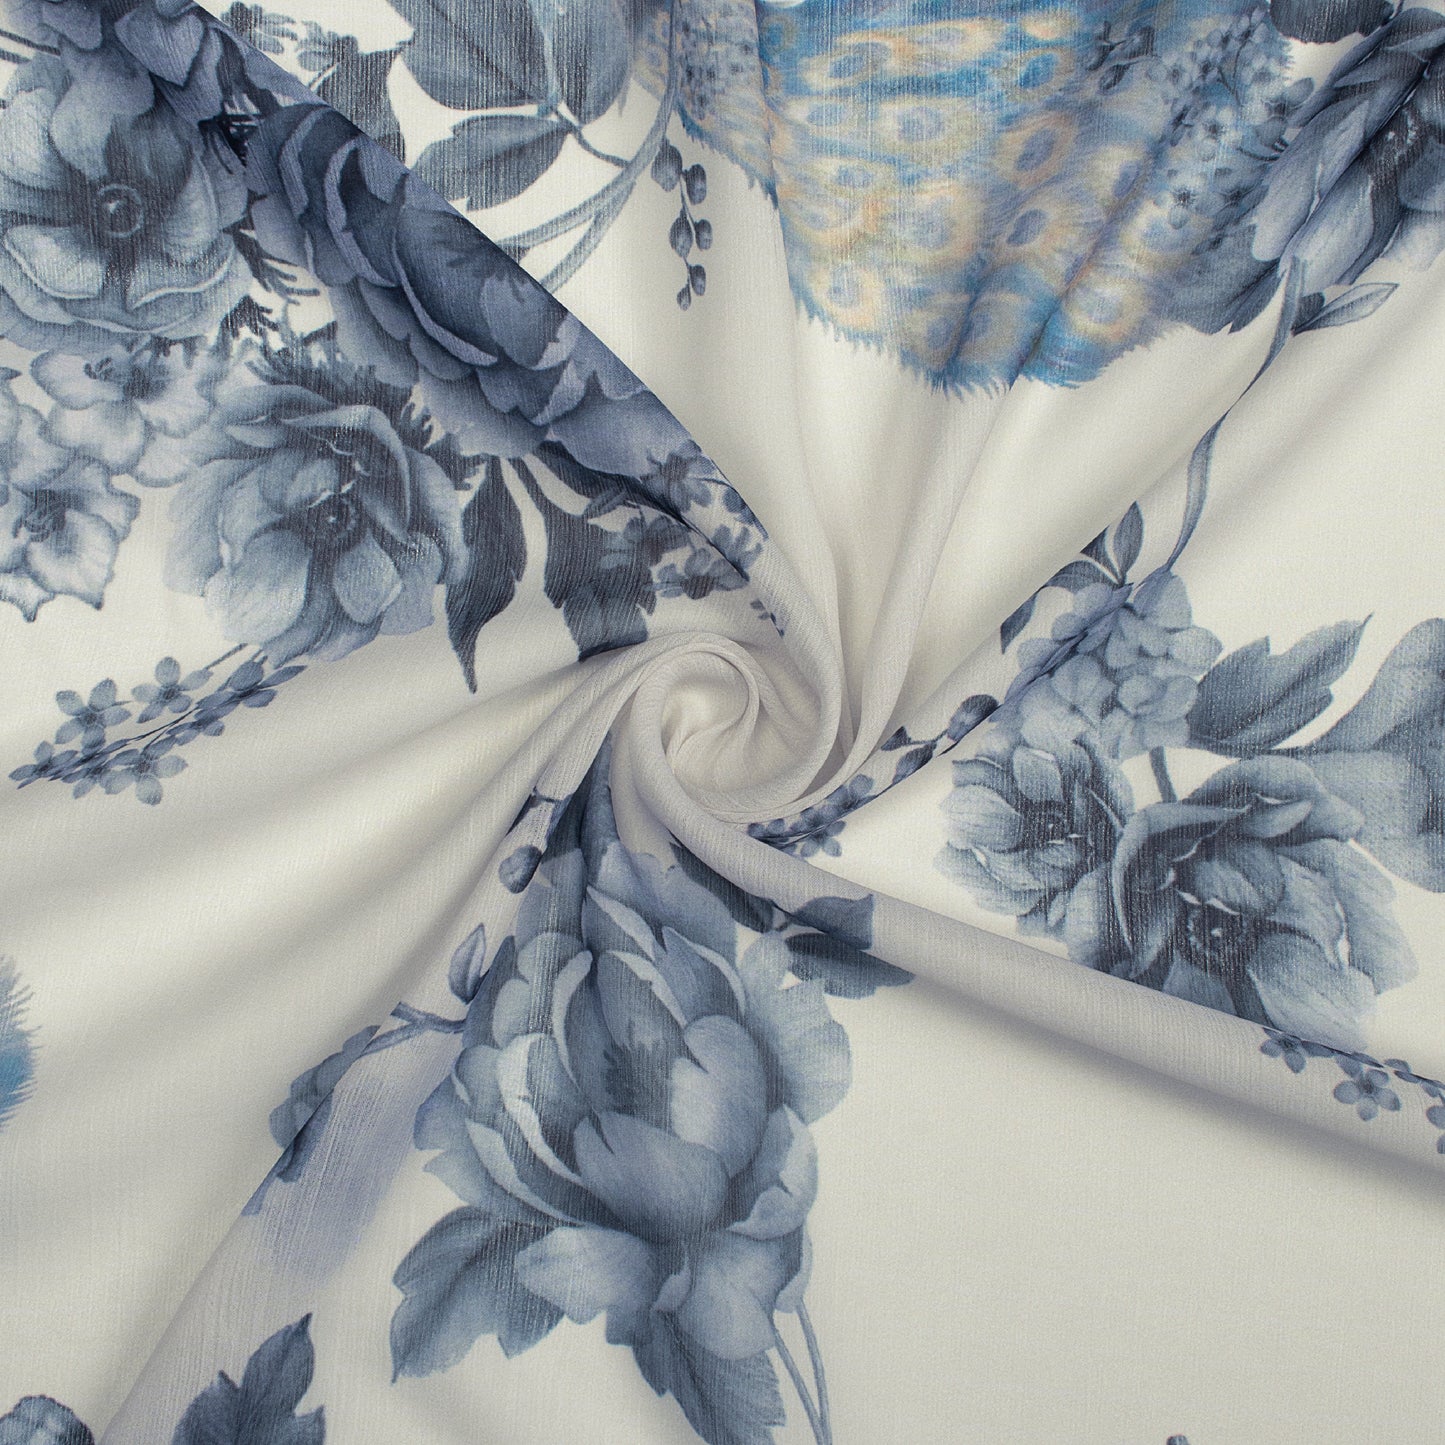 Oat Beige And Dolphin Grey Peacock Feather Pattern Digital Print Chiffon Fabric